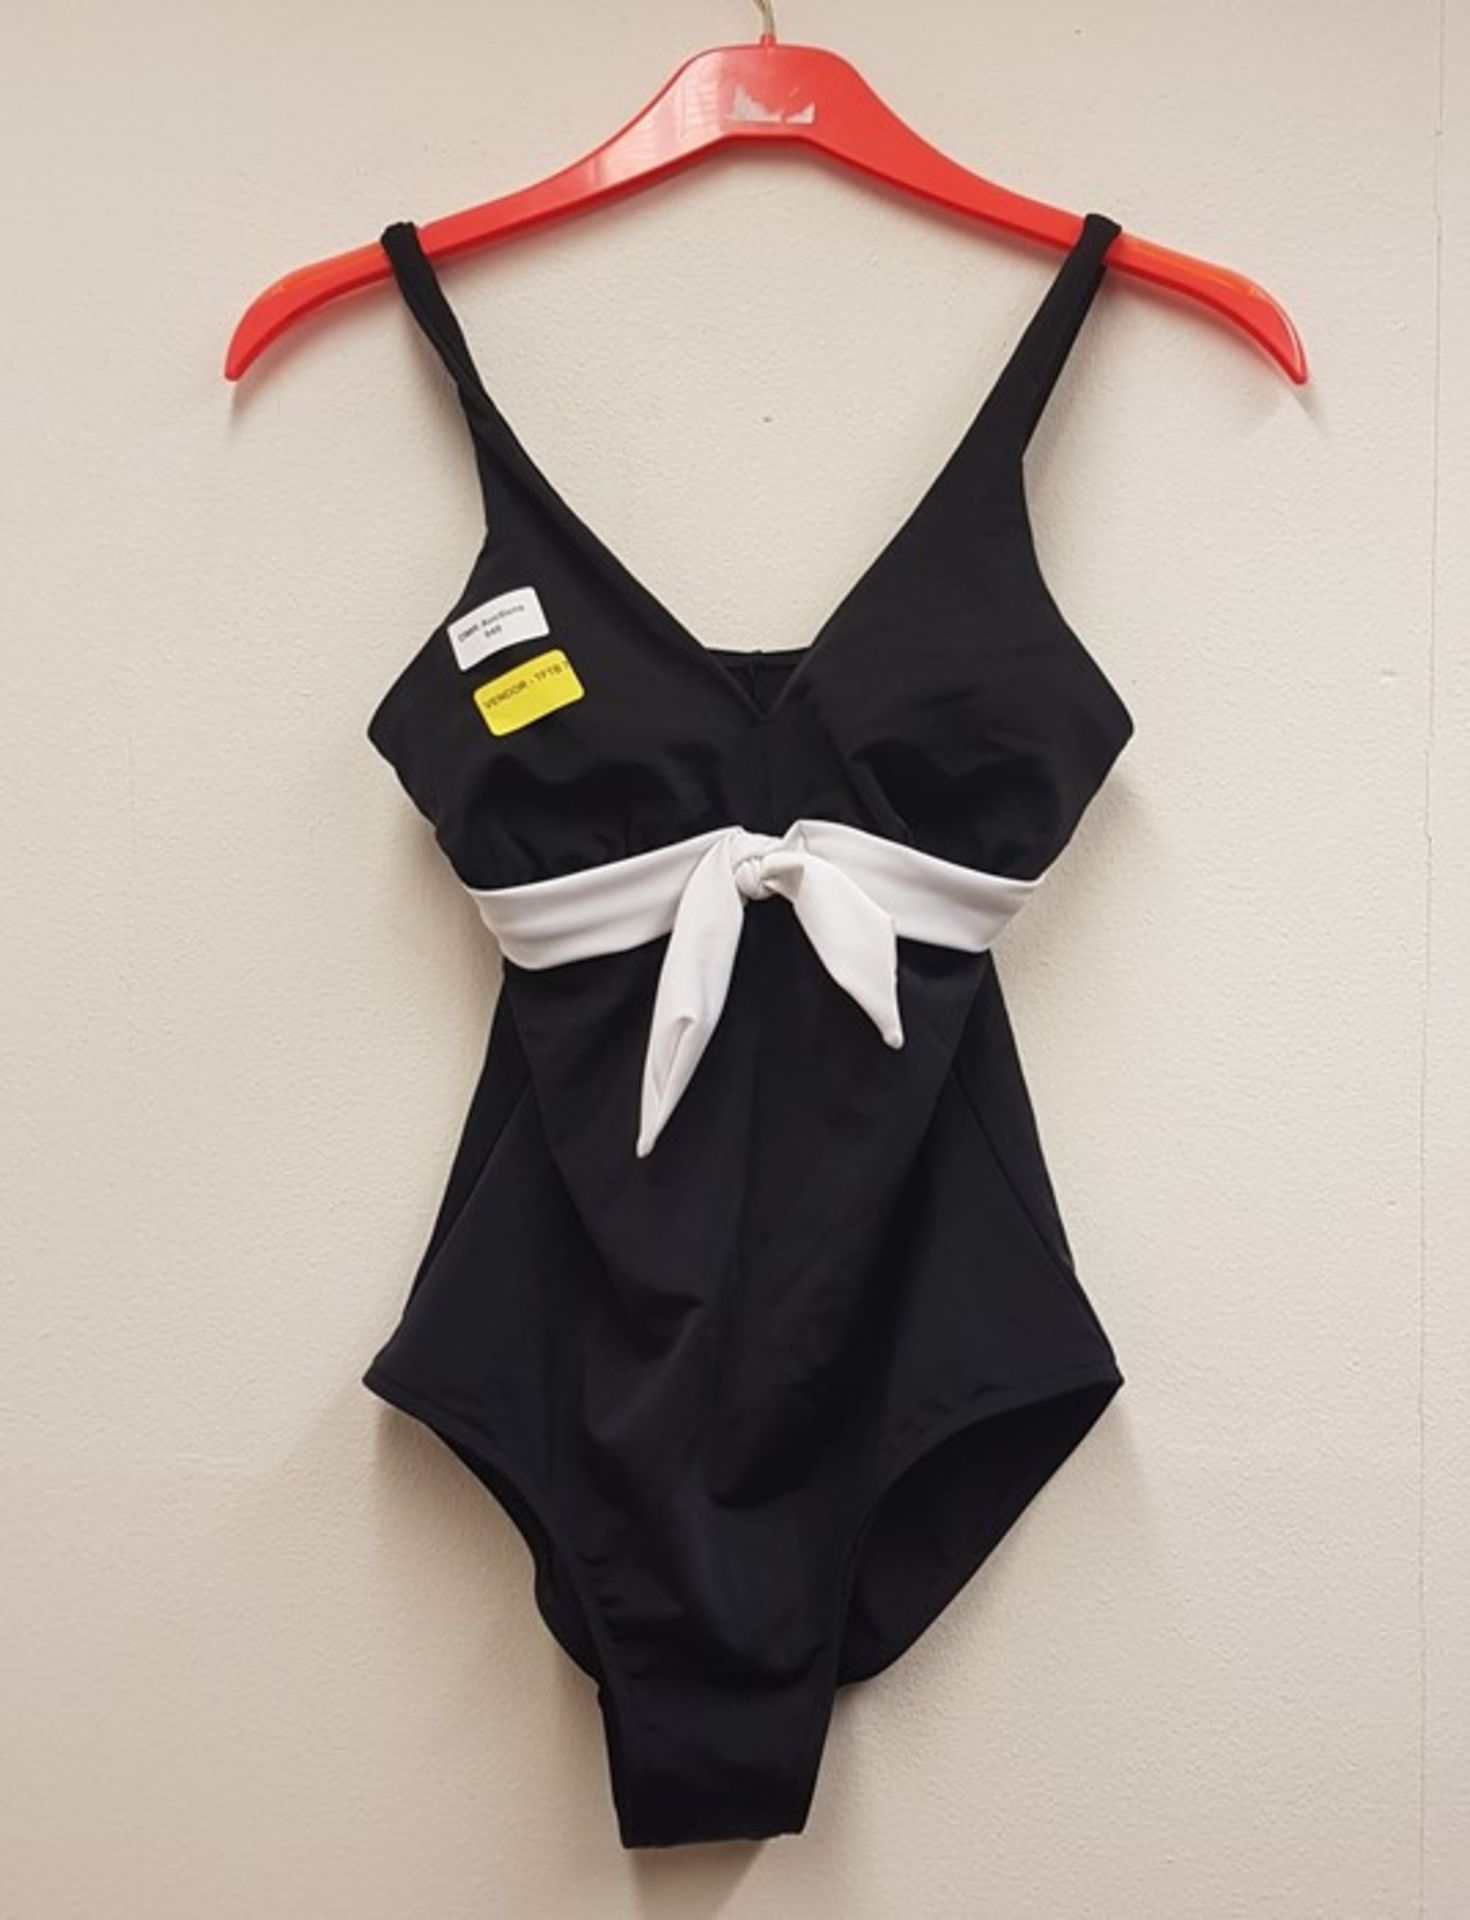 1 LA REDOUTE BLACK SWIMSUIT WITH WHITE BOW / SIZE 12 / RRP £49.99 (VIEWING HIGHLY RECOMMENDED) - Image 2 of 2